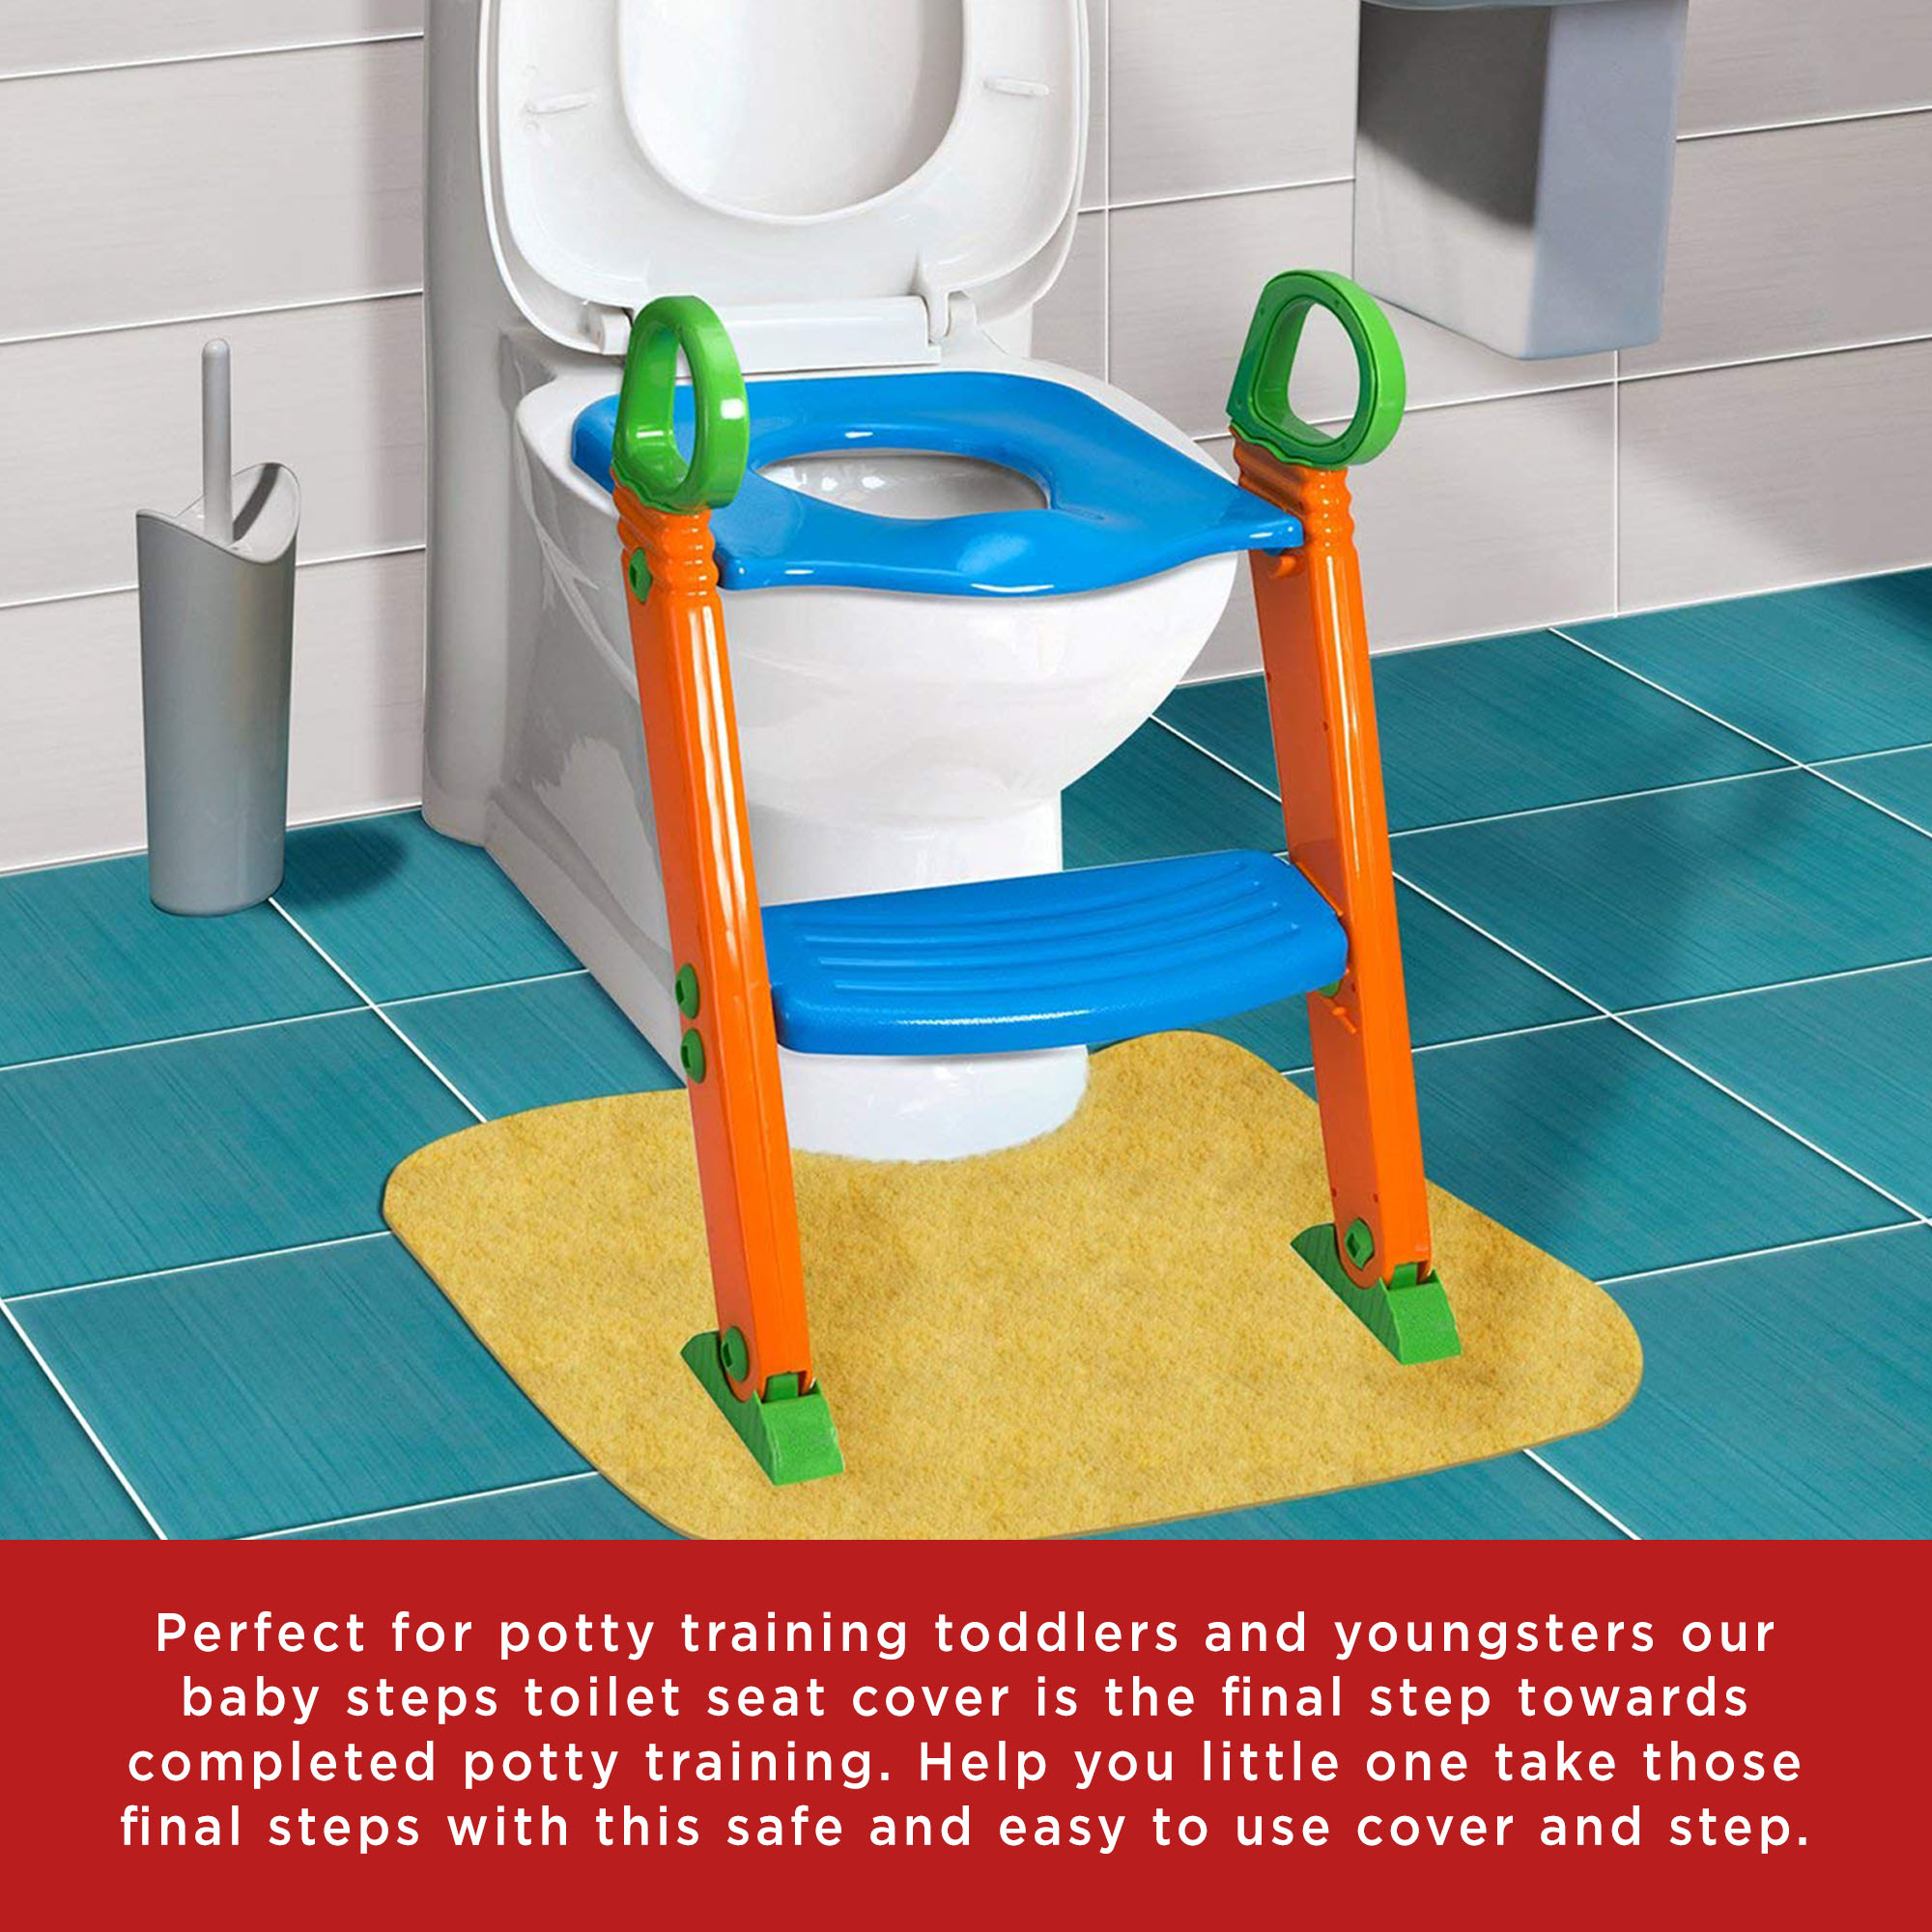 Kazoo Kids Foldable Potty Training Seat with Ladder for Toddlers Unisex - image 3 of 7